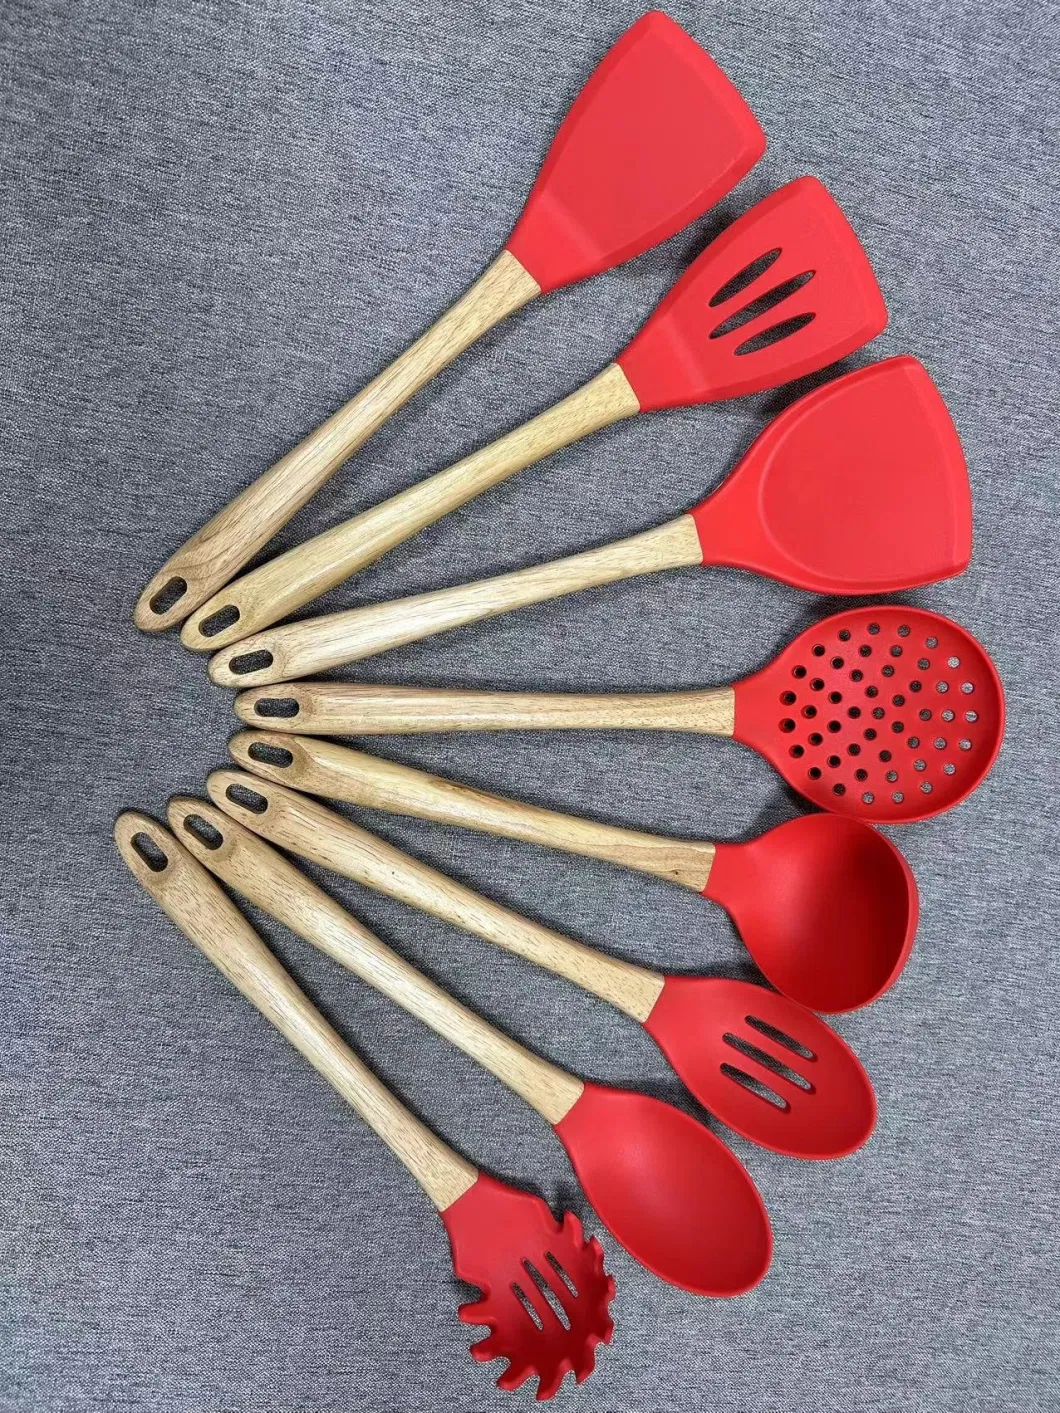 8PC Wood Handle High Temperature Silicone Kitchen Tool Cooking Utensils Set